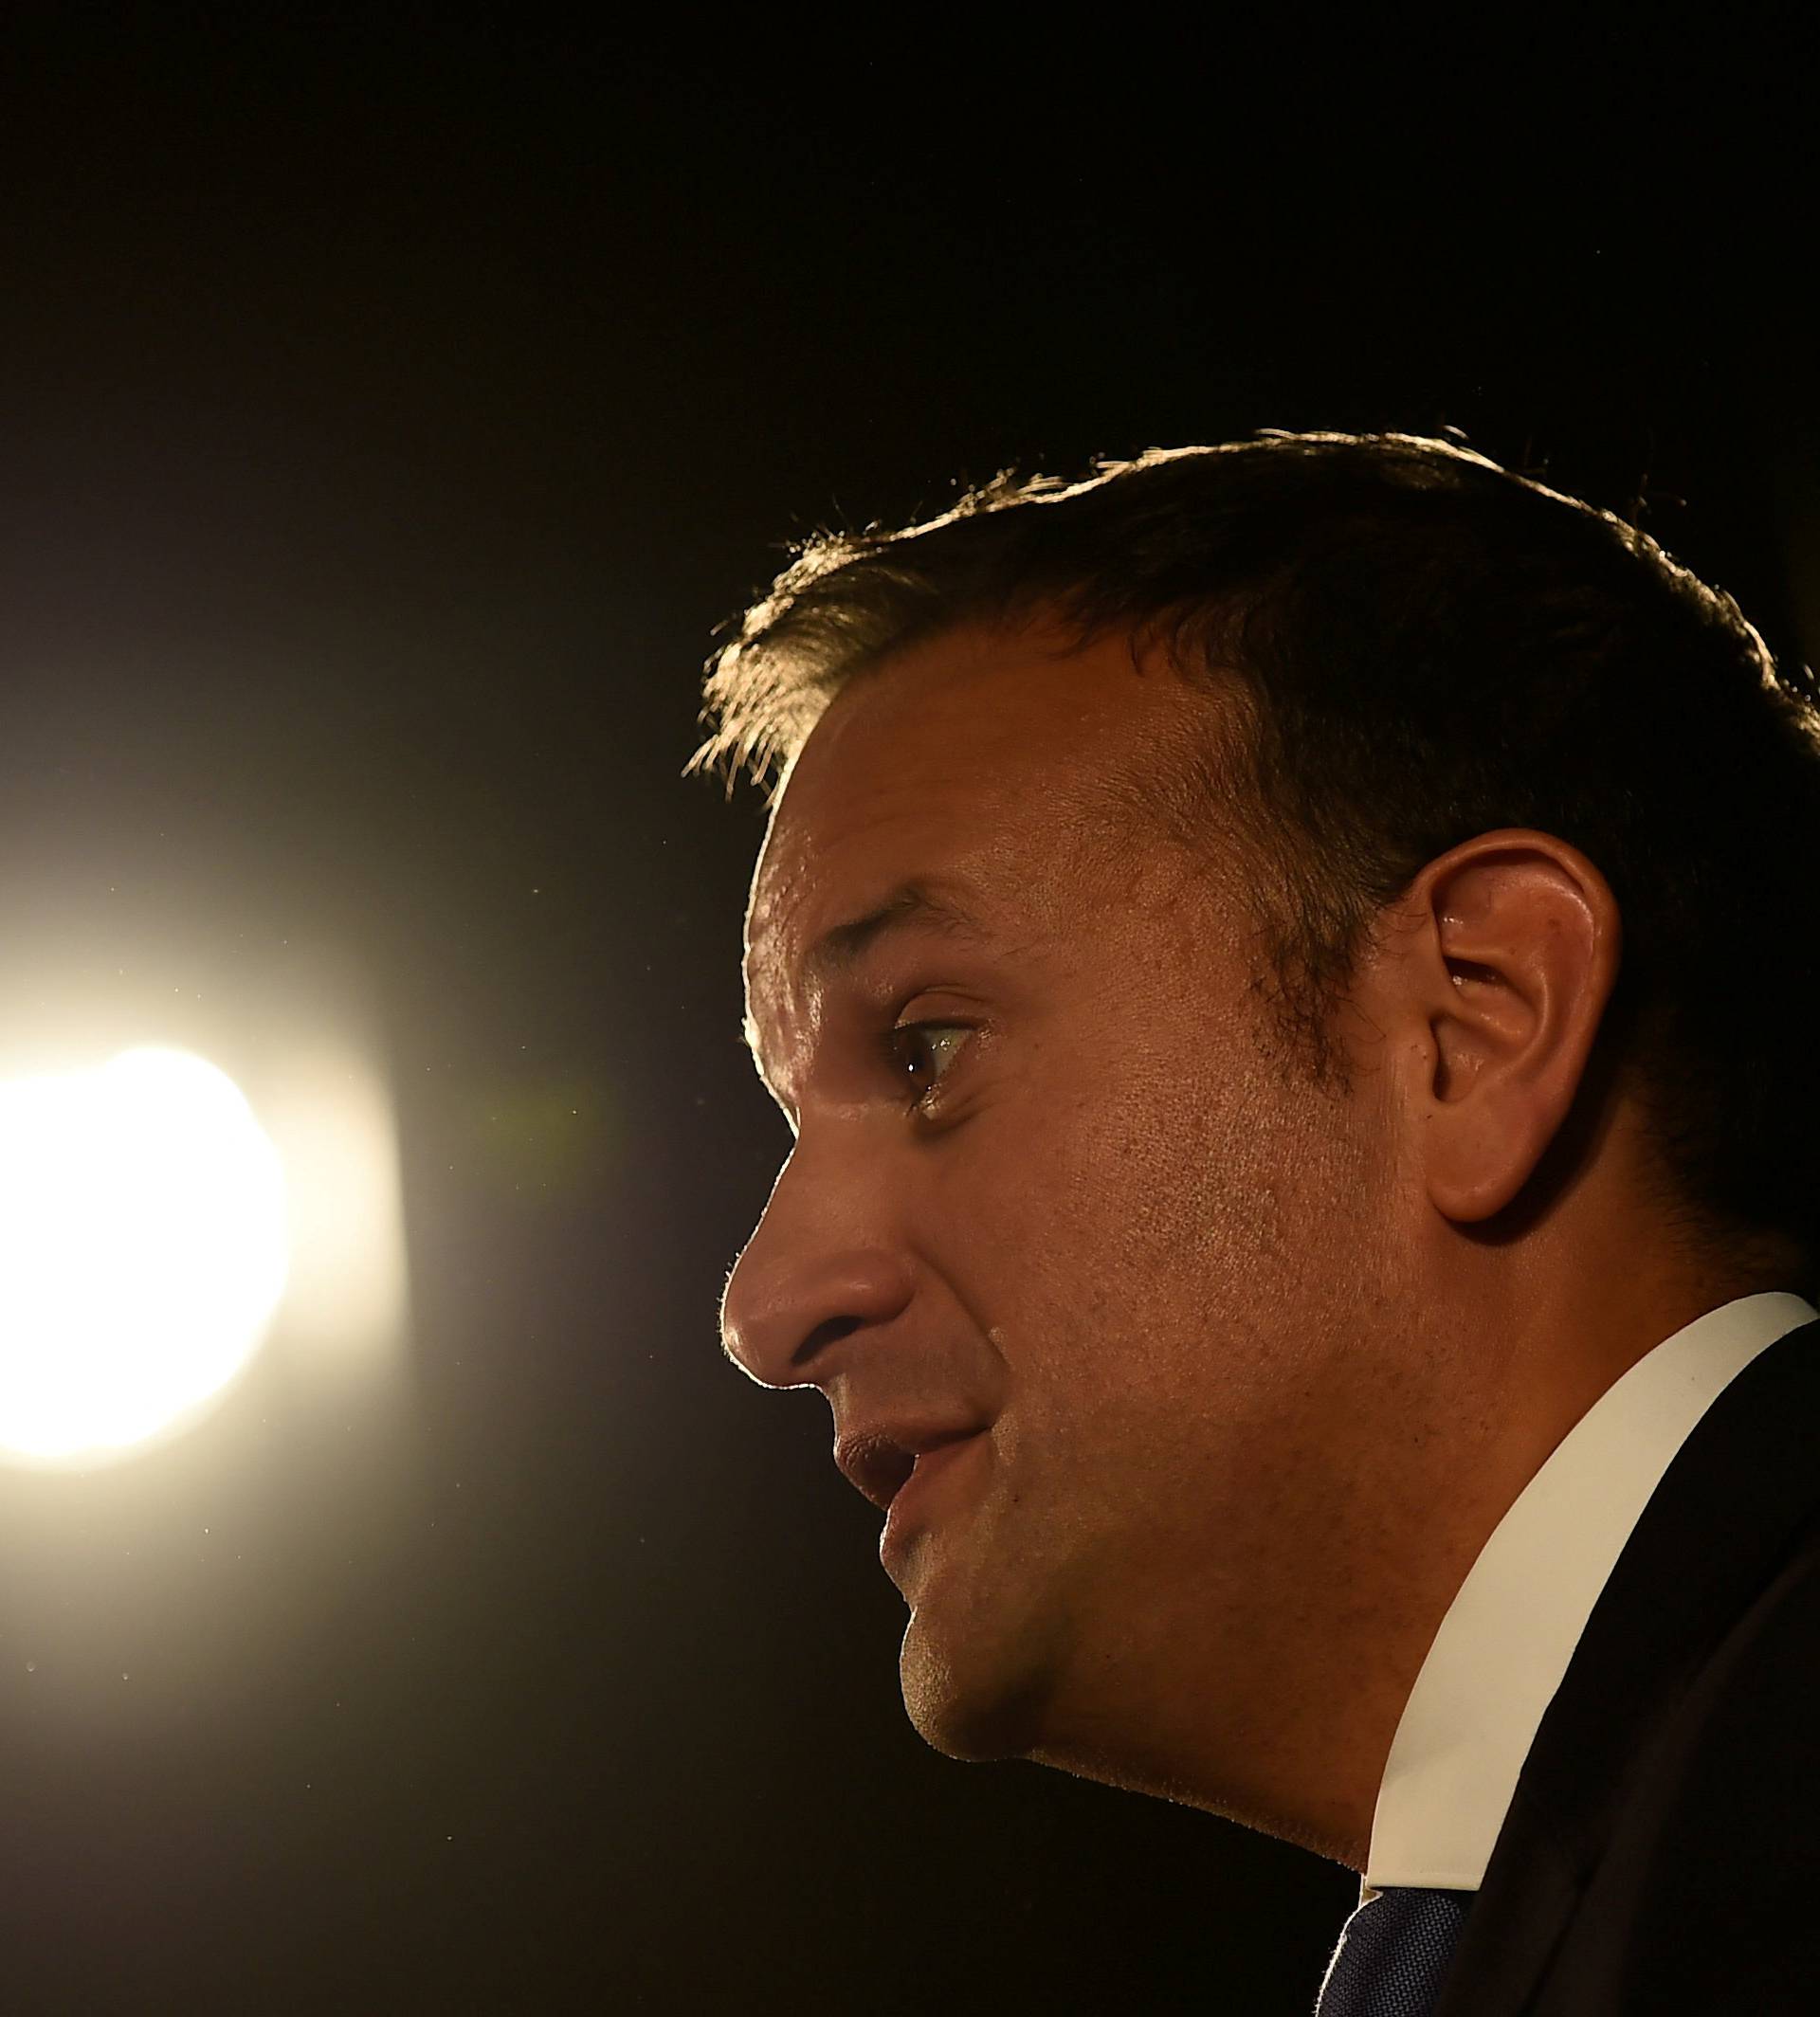 FILE PHOTO: Ireland's Minister for Social Protection Leo Varadkar launches his campaign bid for Fine Gael party leader in Dublin